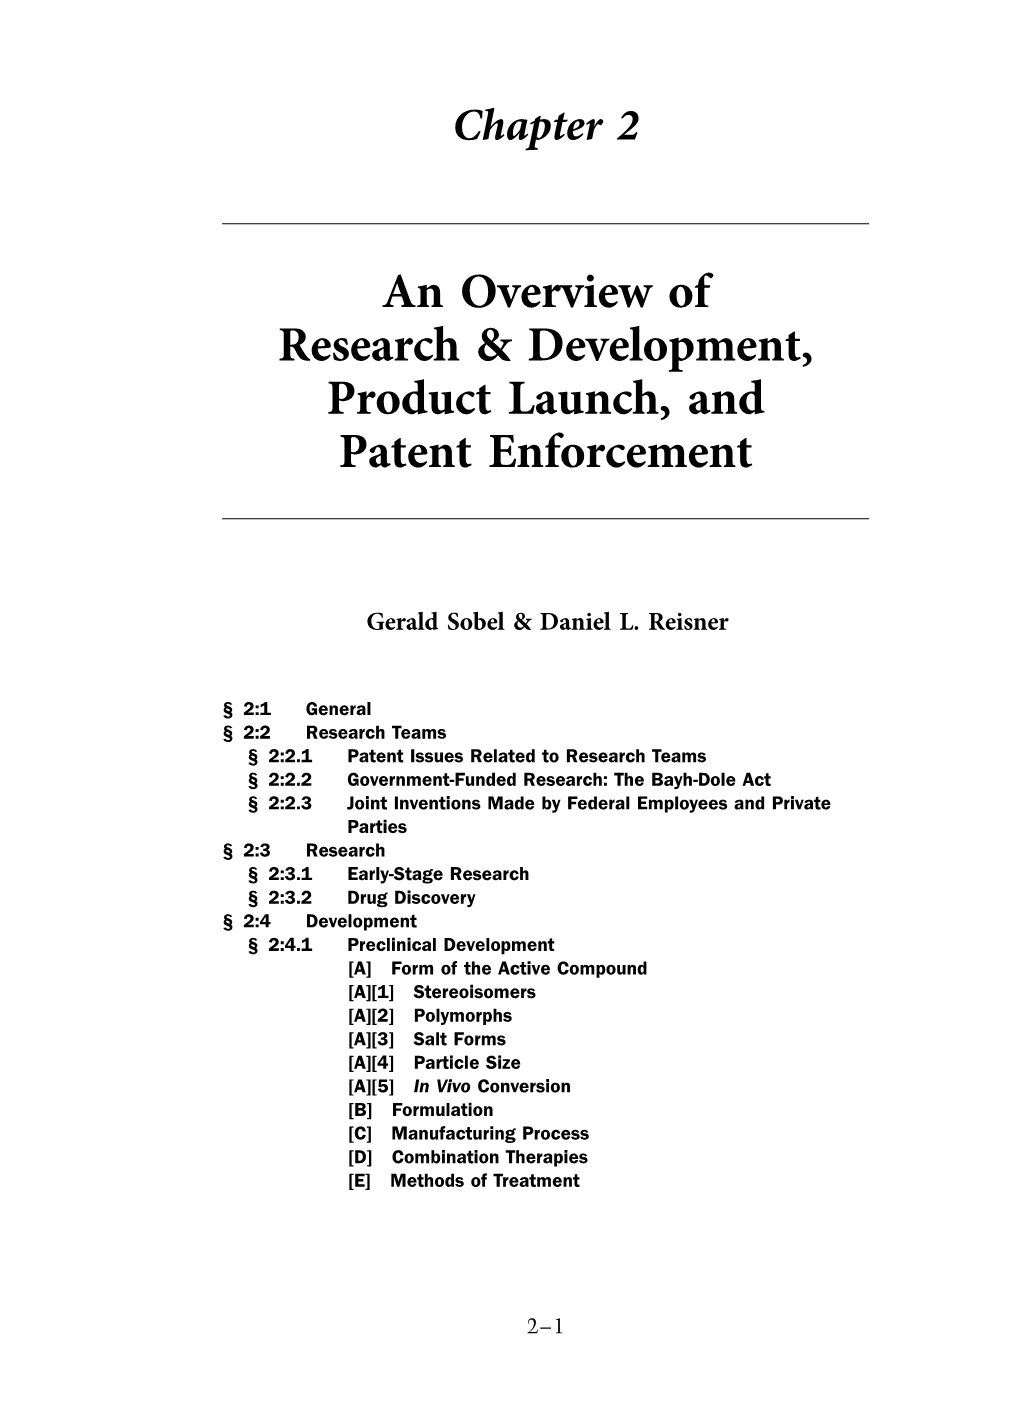 An Overview of Research & Development, Product Launch And